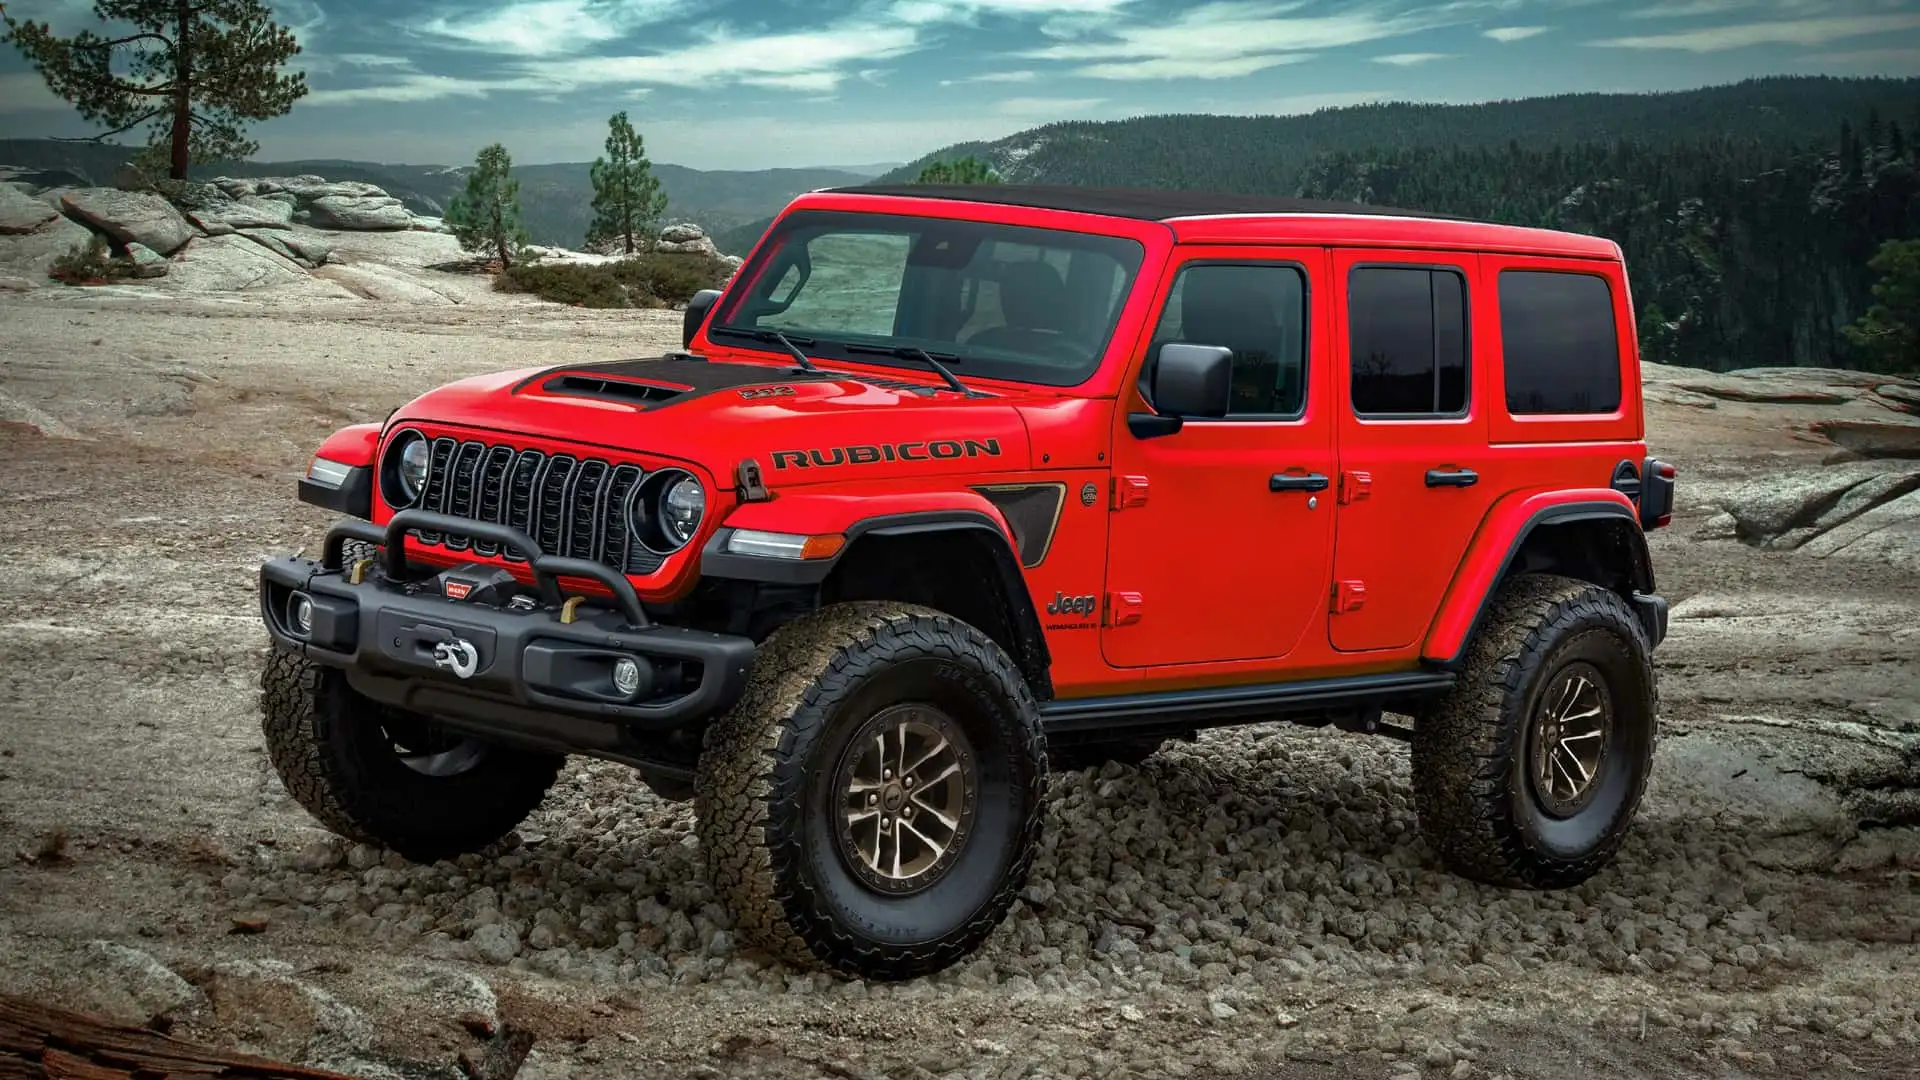 Jeep Wrangler V8 Rubicon 392 Final Edition: save the best for last!